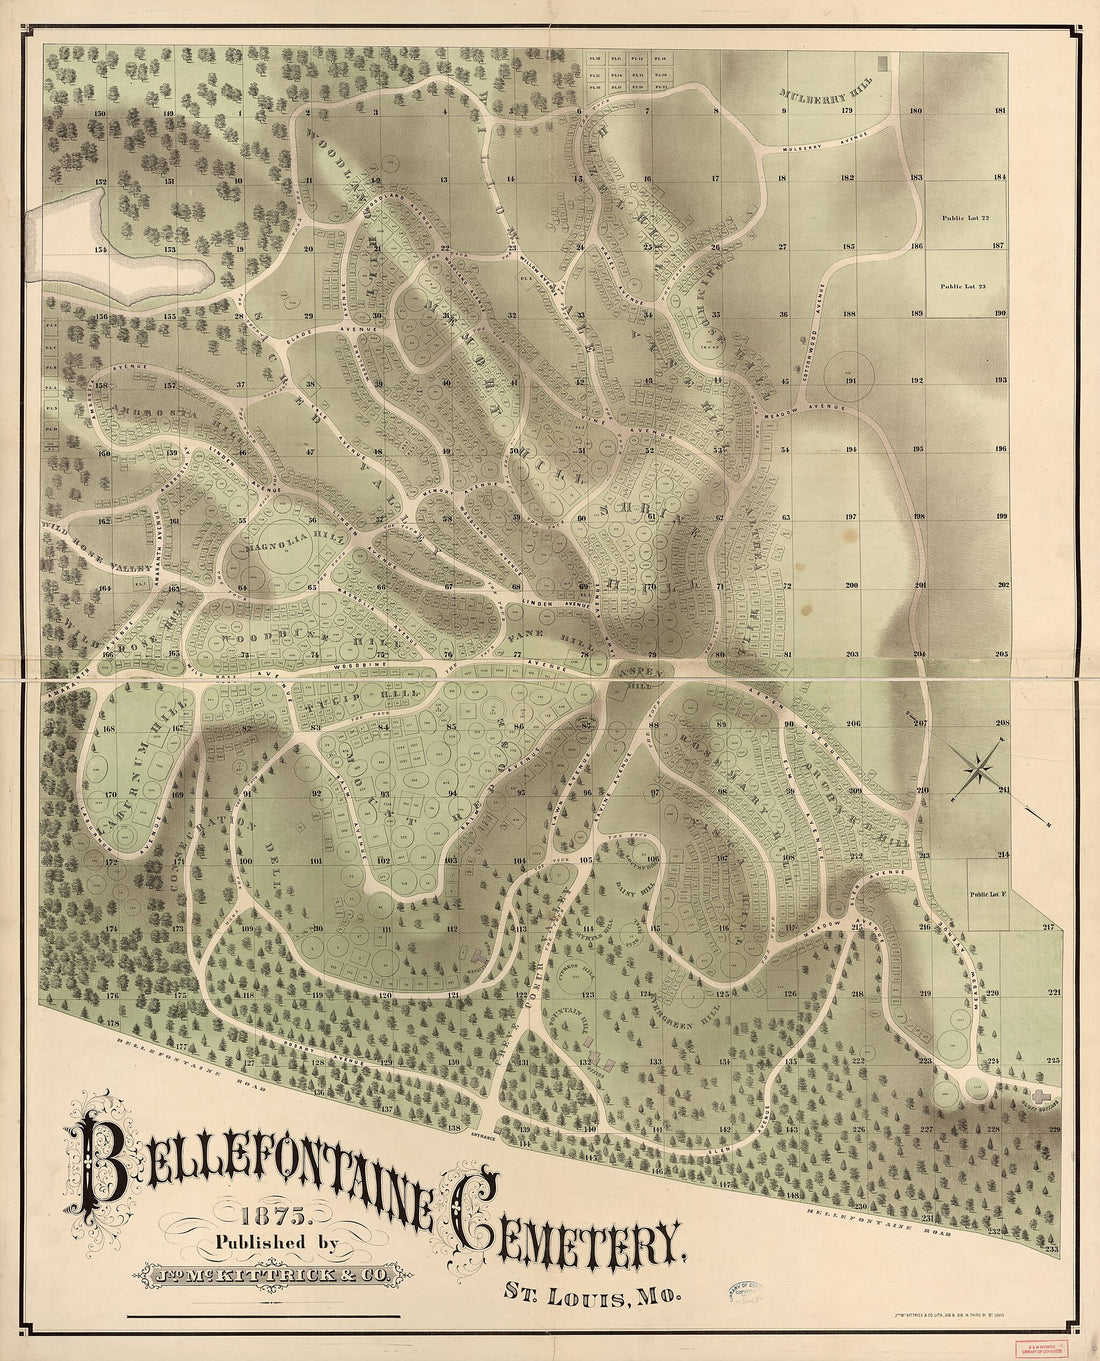 This old map of Bellefontaine Cemetery, St. Louis, Mo. (Bellefontaine Cemetery, Saint Louis, Missouri) from 1875 was created by  Jno. McKittrick &amp; Co in 1875